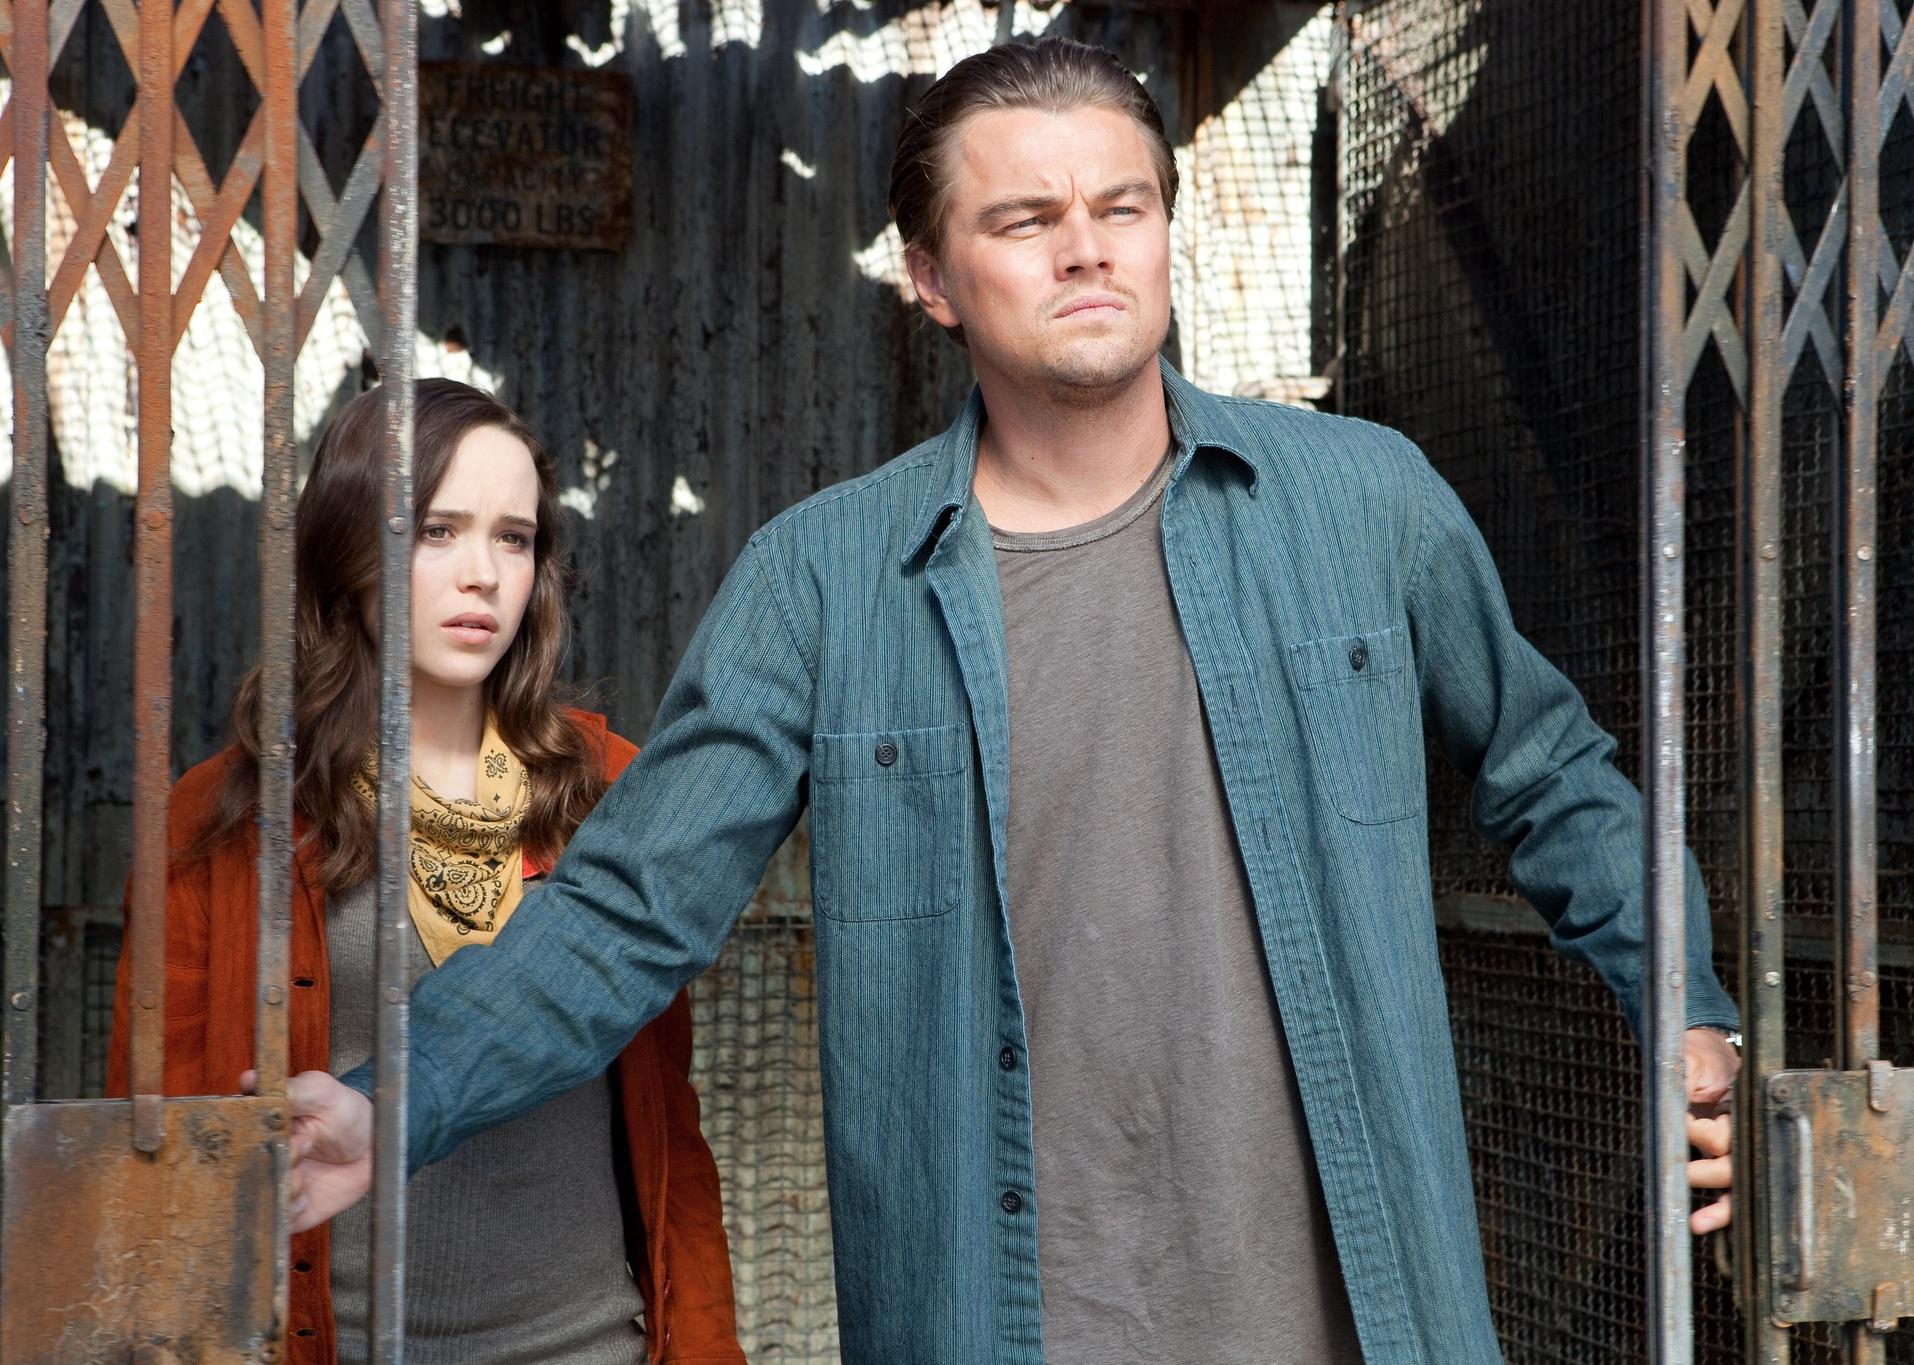 Leonardo DiCaprio and Elliot Page standing in the doorway of an old gate.